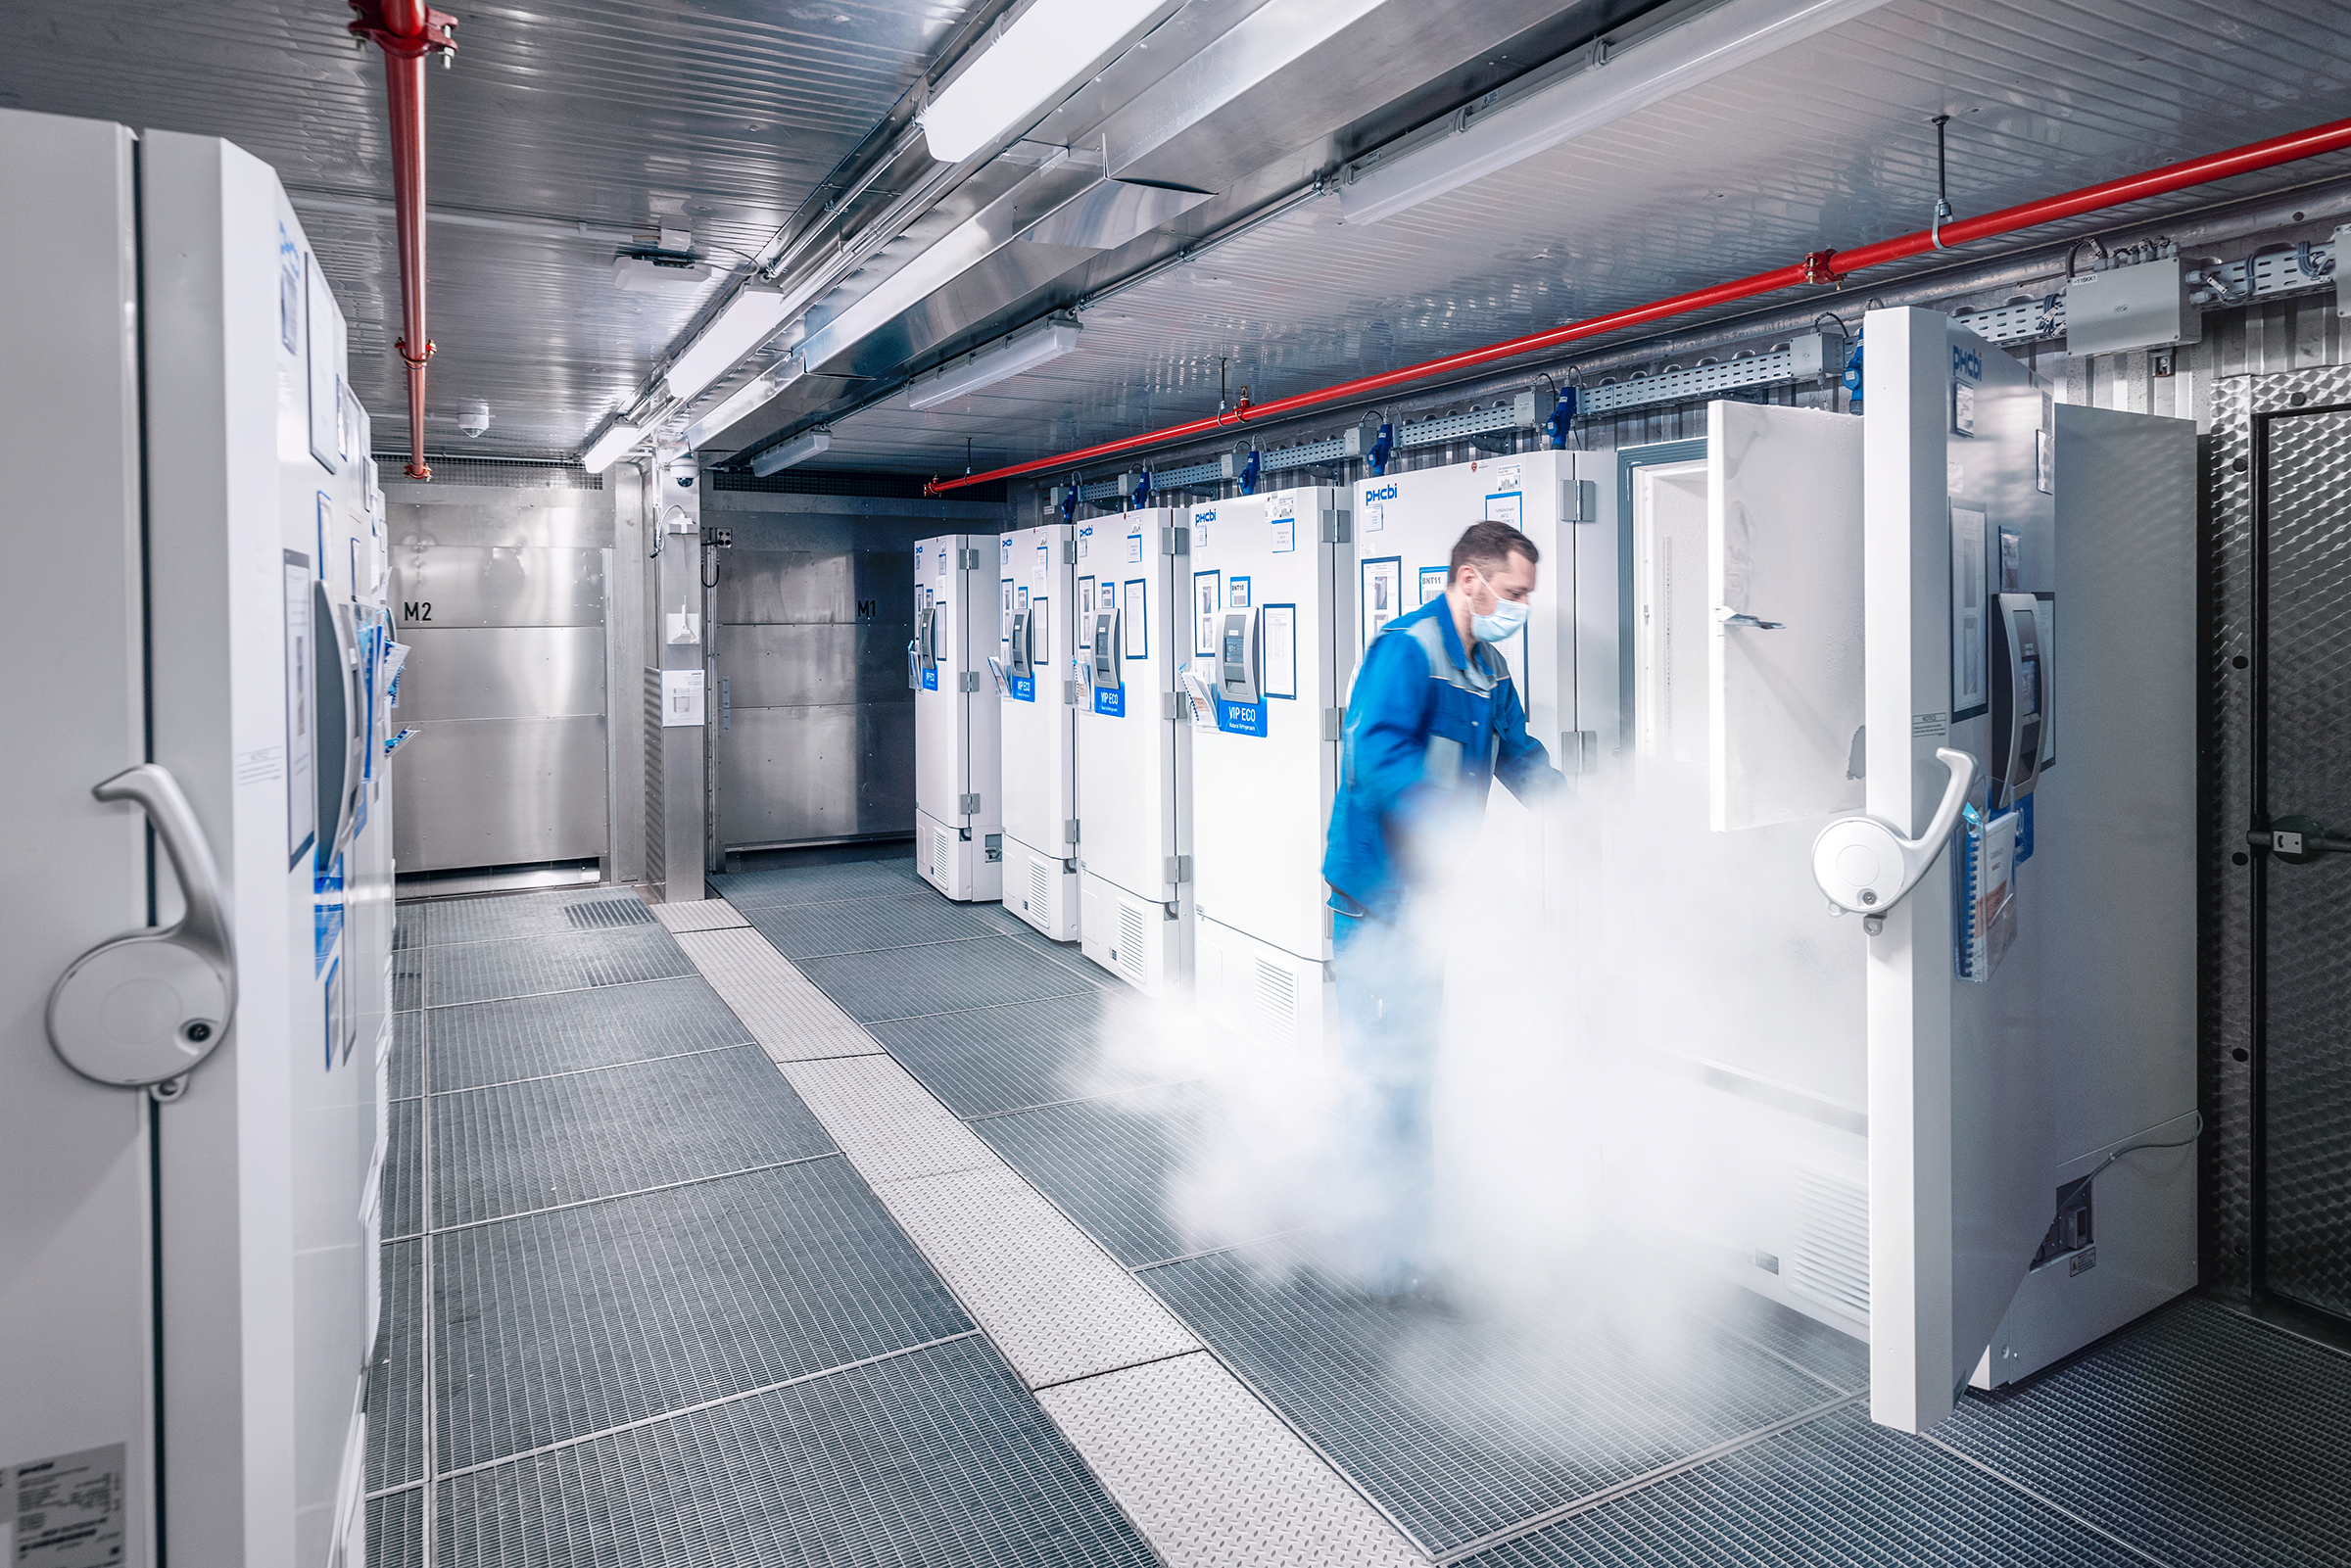 Once bottled, the Pfizer-BioNTech vaccine is stored at -82°C (-116°F) at a filling and labeling facility in Halle. (Luca Locatelli for TIME)